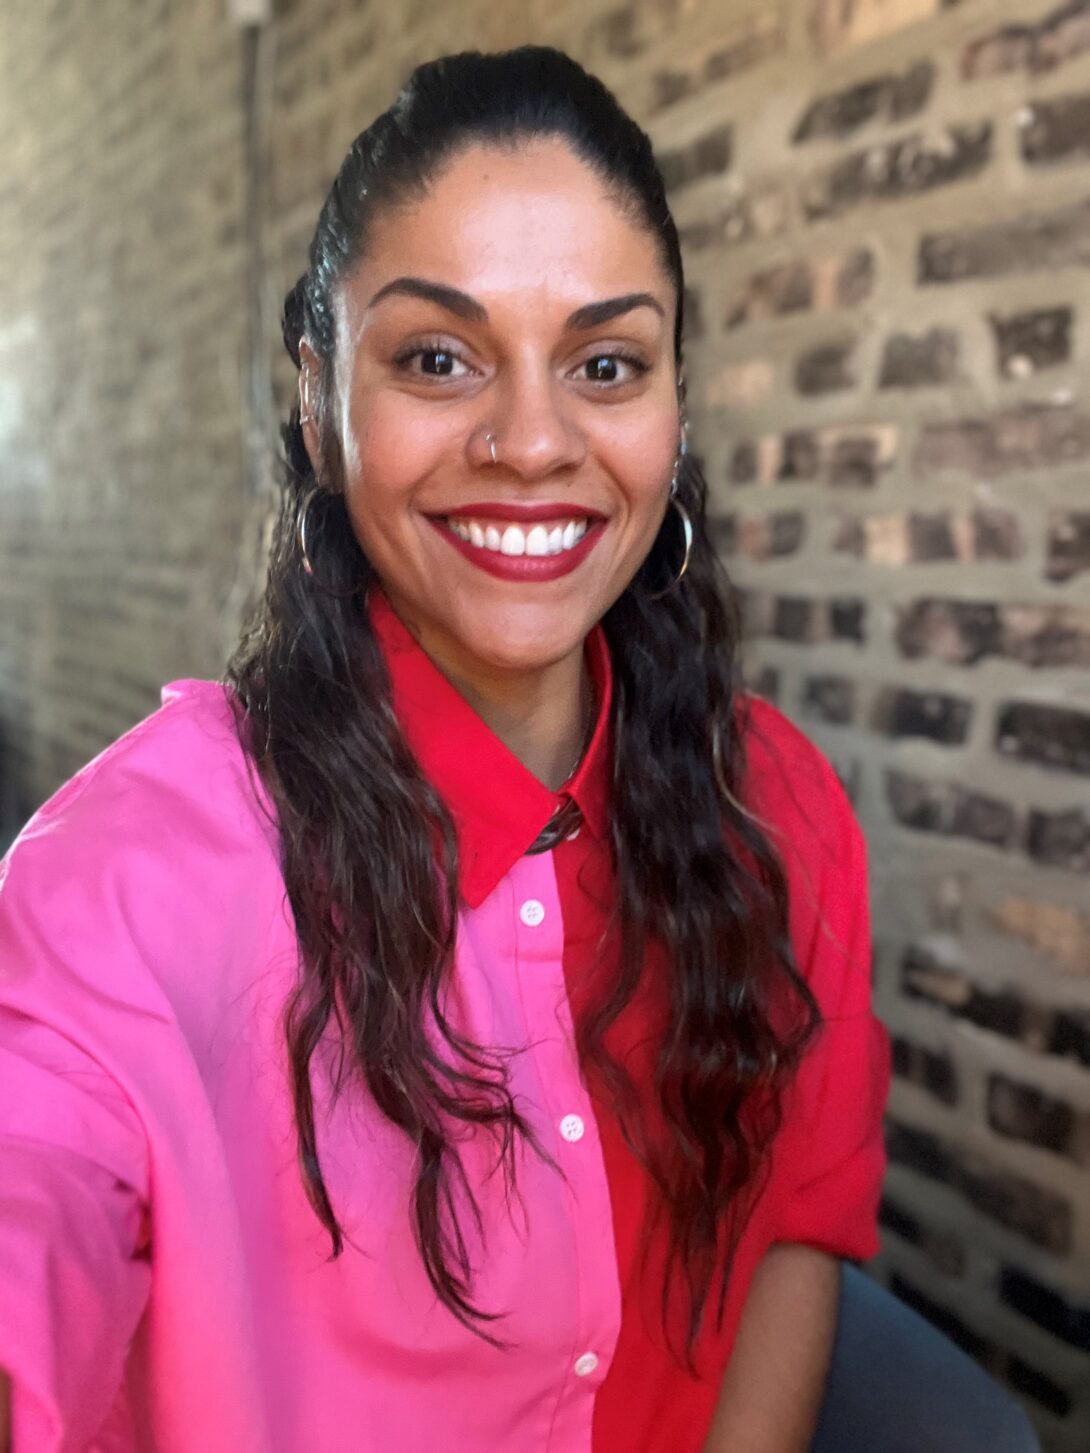 woman standing in front of a brick wall wearing a pink and red shirt